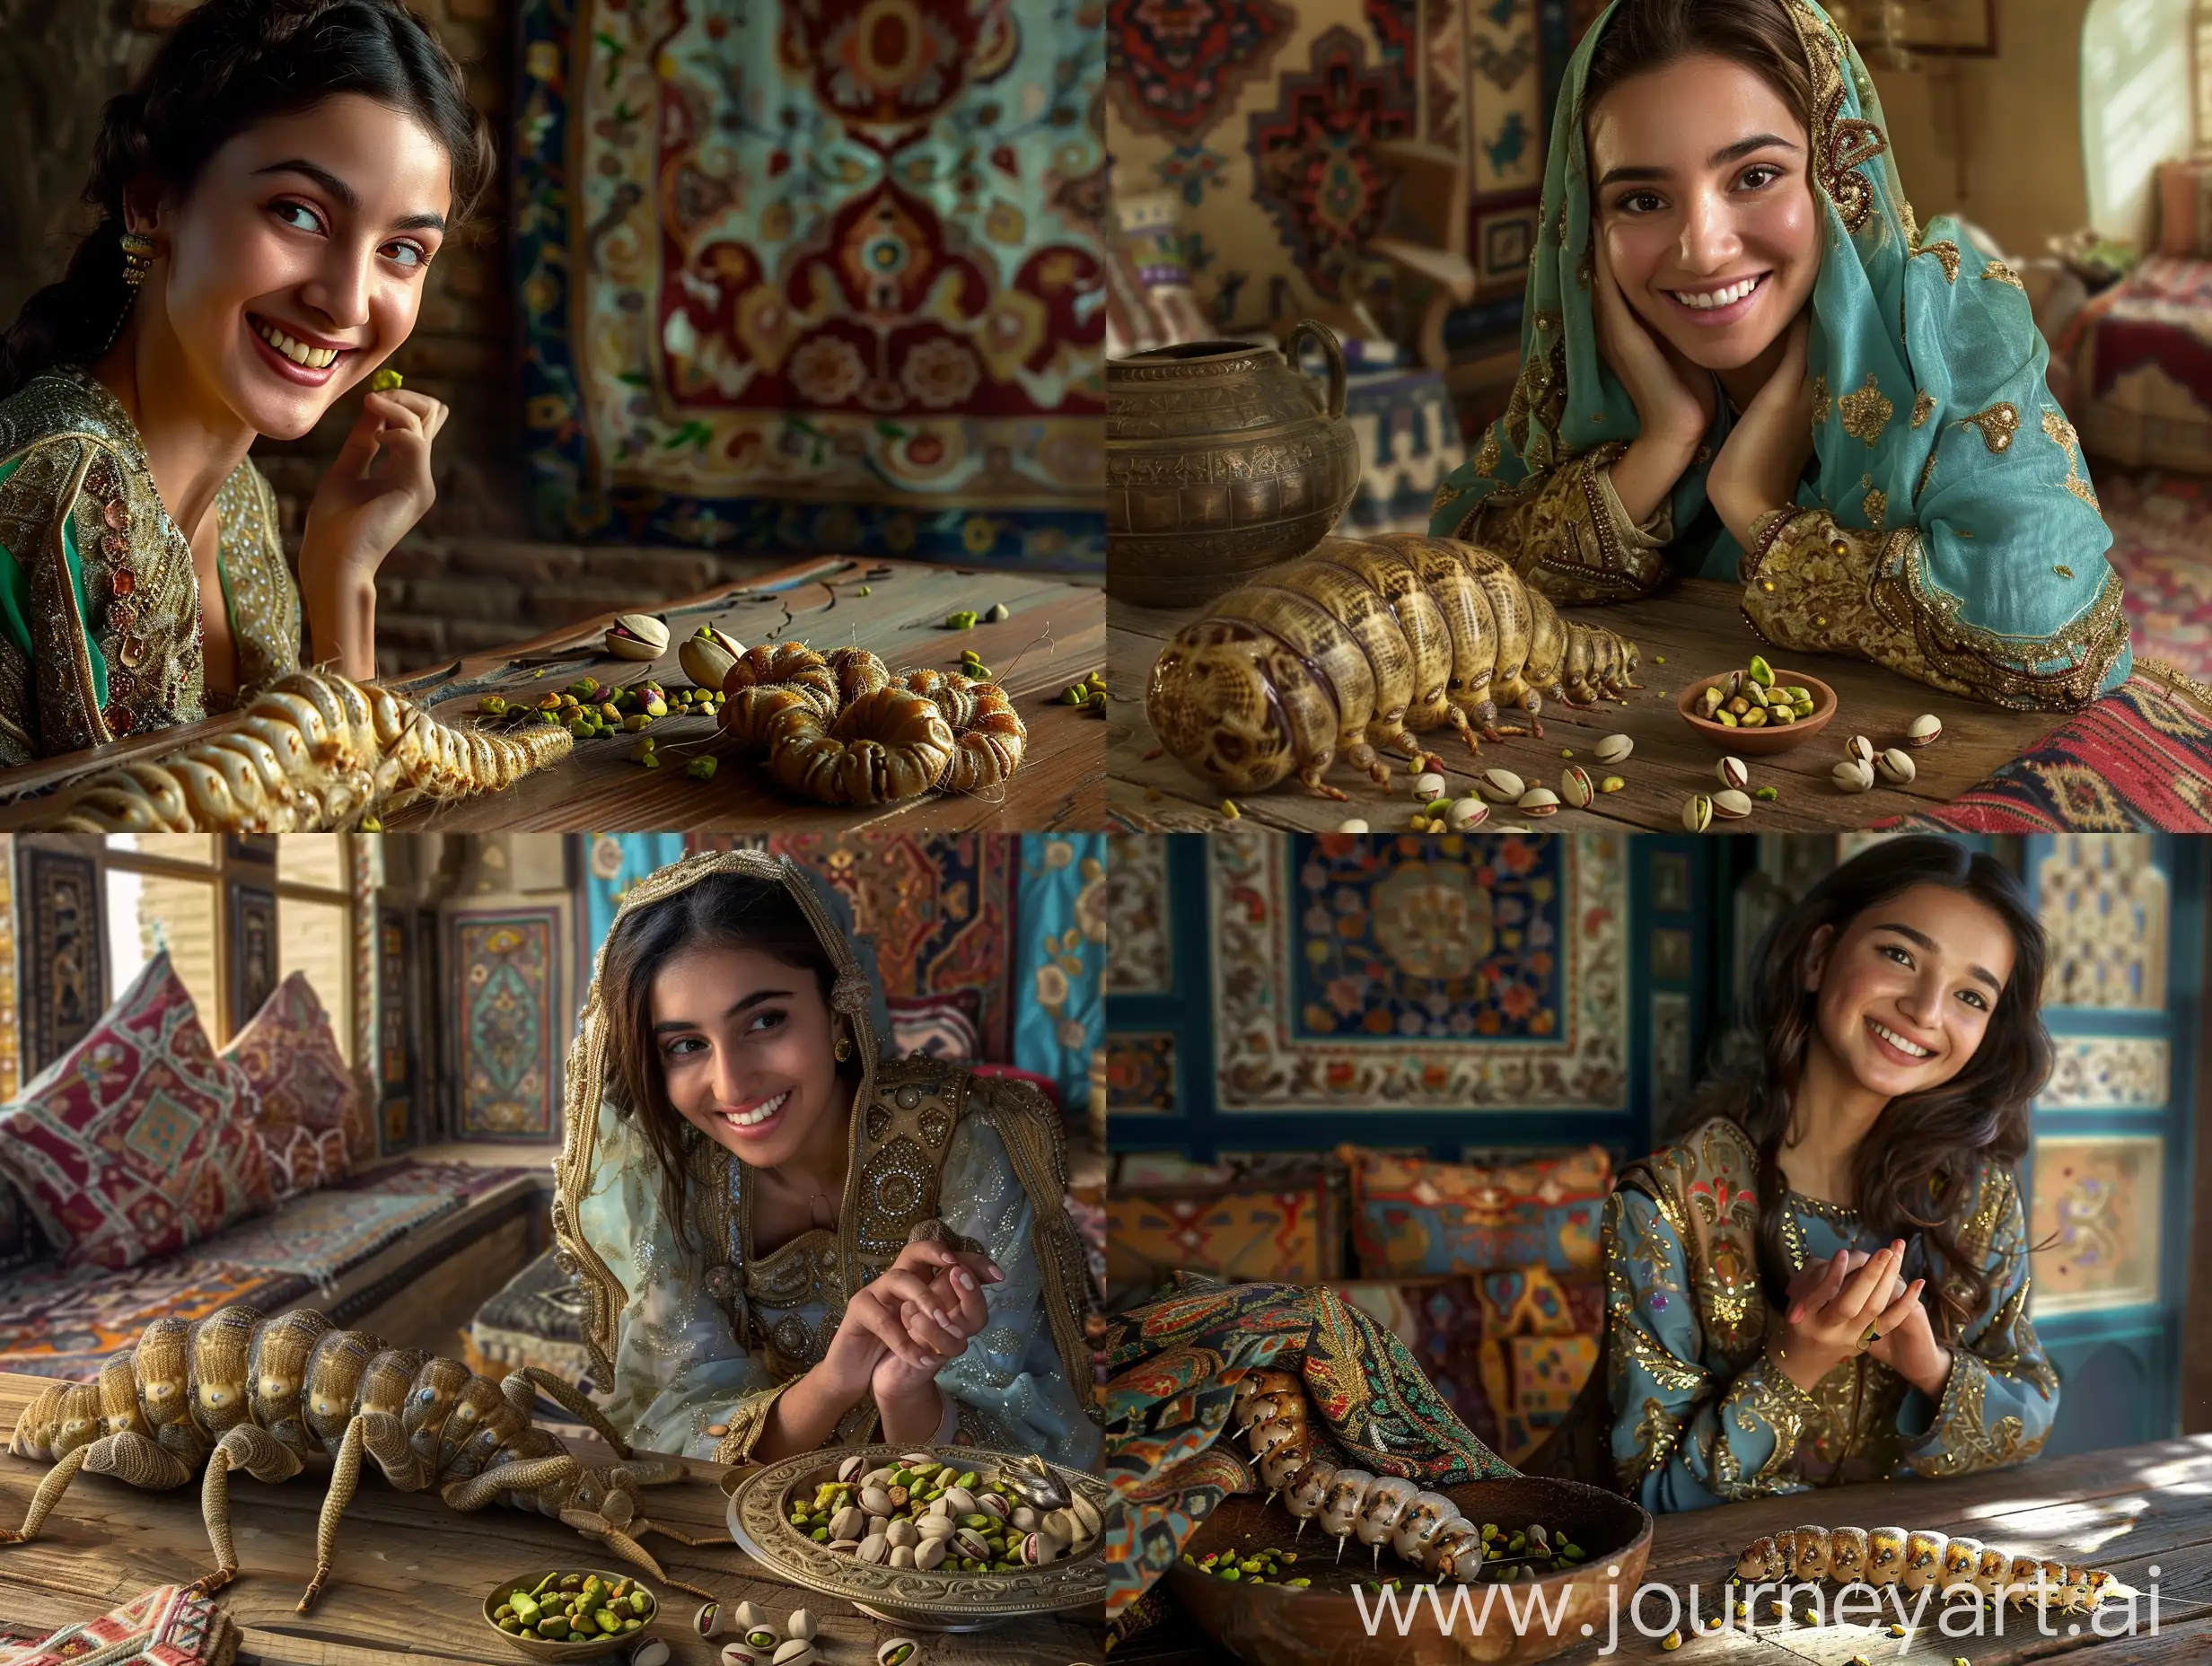  a young Persian woman in a traditional room in Persian Empire, with smiles, offer a big giant silkworm on the wooden table, some pistachio, and the silk worm eat it, make a high resolution real picture.